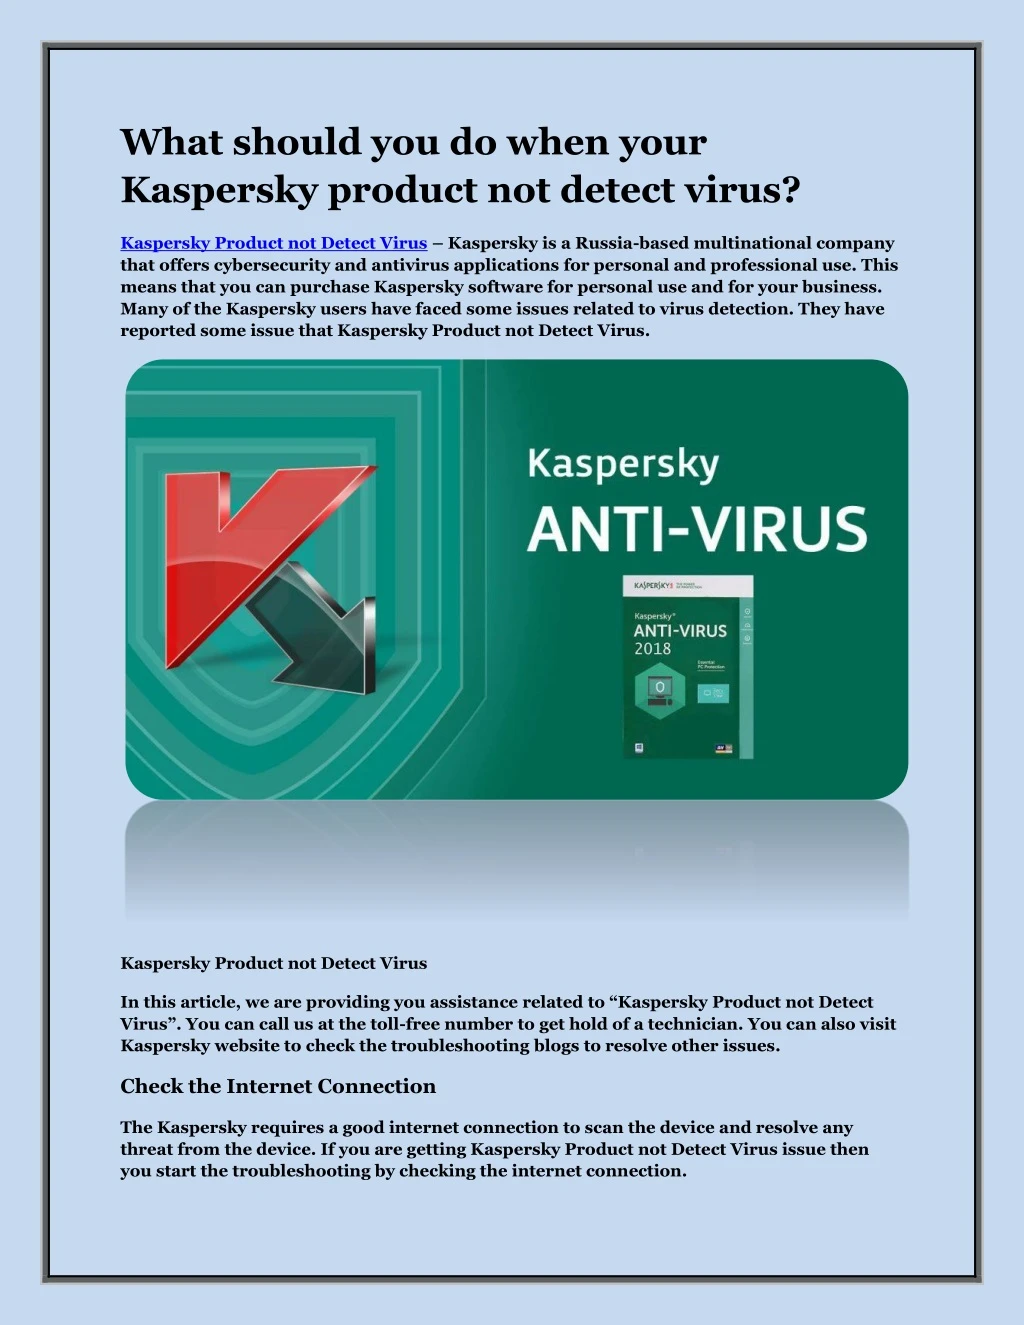 what should you do when your kaspersky product